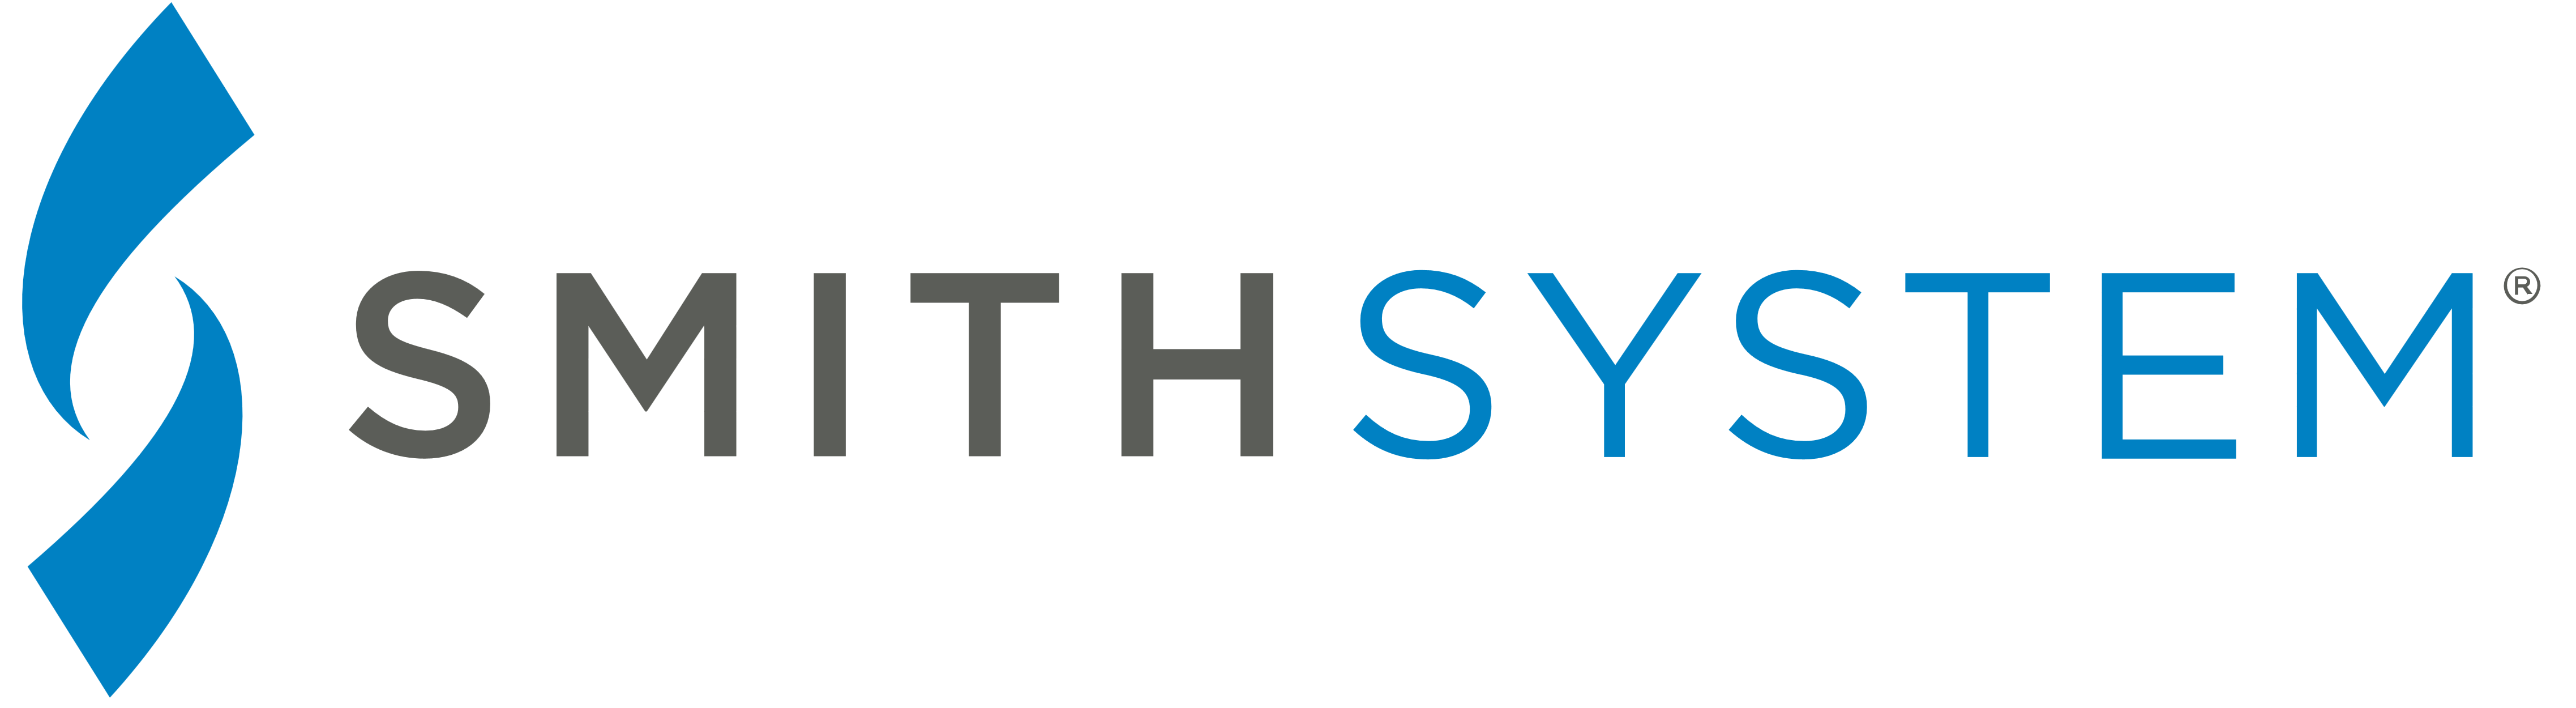 Smith System Logos Download